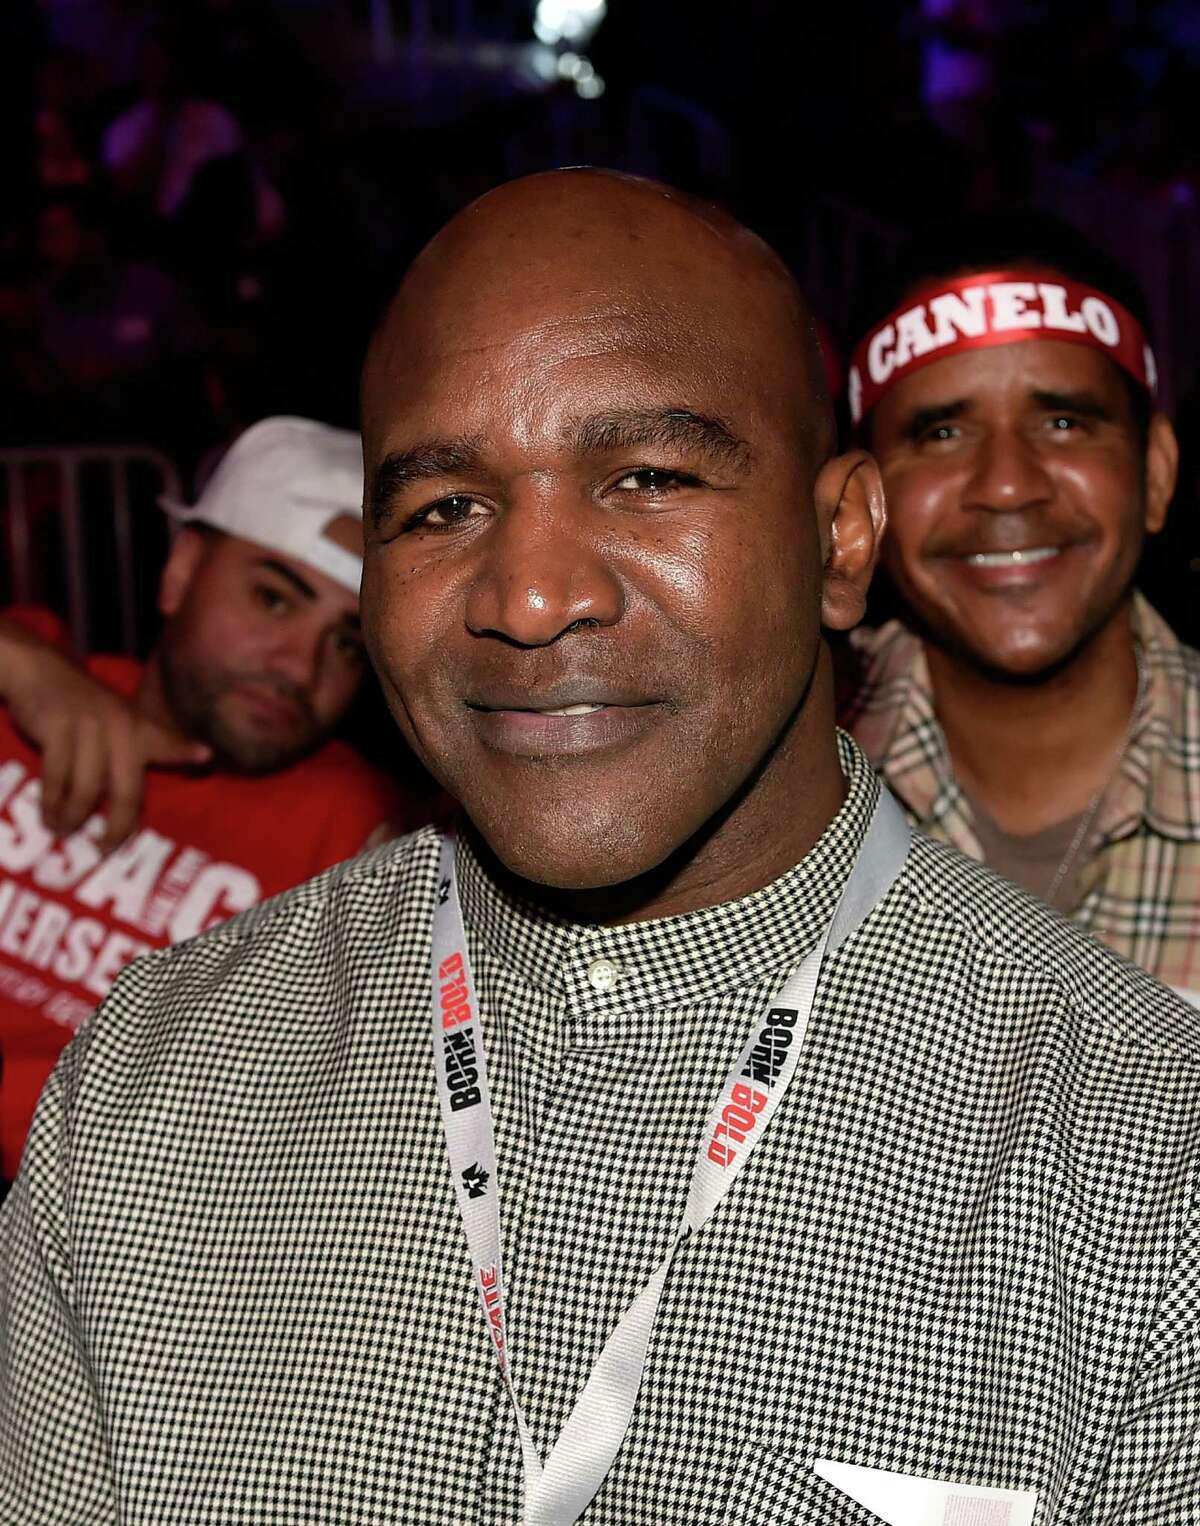 LAS VEGAS, NEVADA - MAY 07: Former professional boxer Evander Holyfield attends the Canelo Alvarez and Amir Khan WBC middleweight title fight at T-Mobile Arena on May 7, 2016 in Las Vegas, Nevada. (Photo by David Becker/Getty Images) ORG XMIT: 605224103